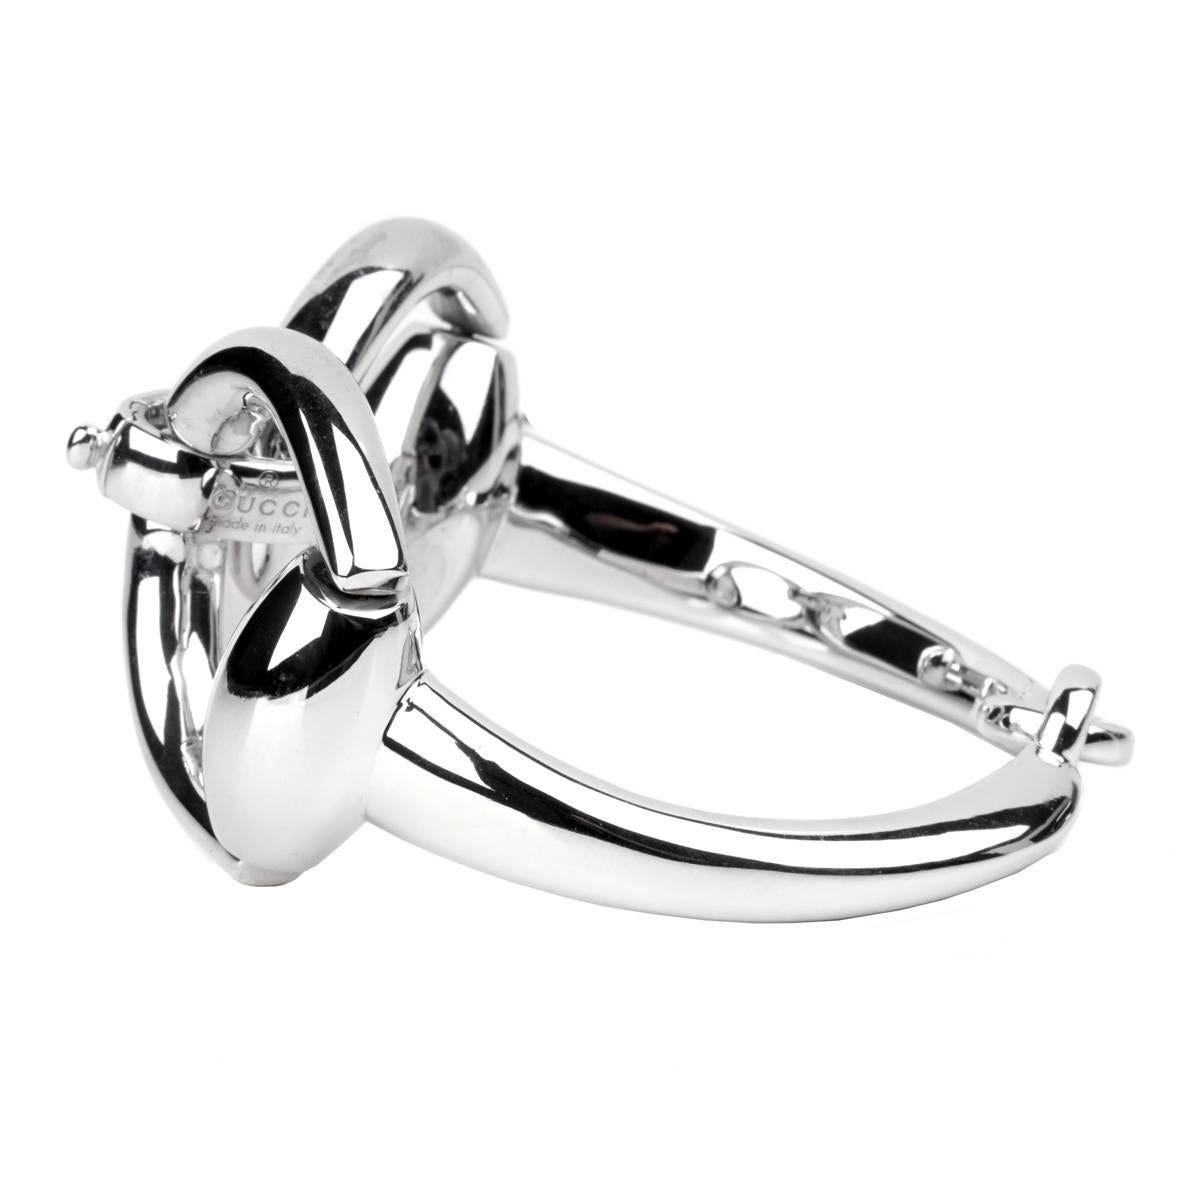 A fabulous Gucci bangle is sterling silver displaying the iconic Horsebit motif. The bracelet measures 7